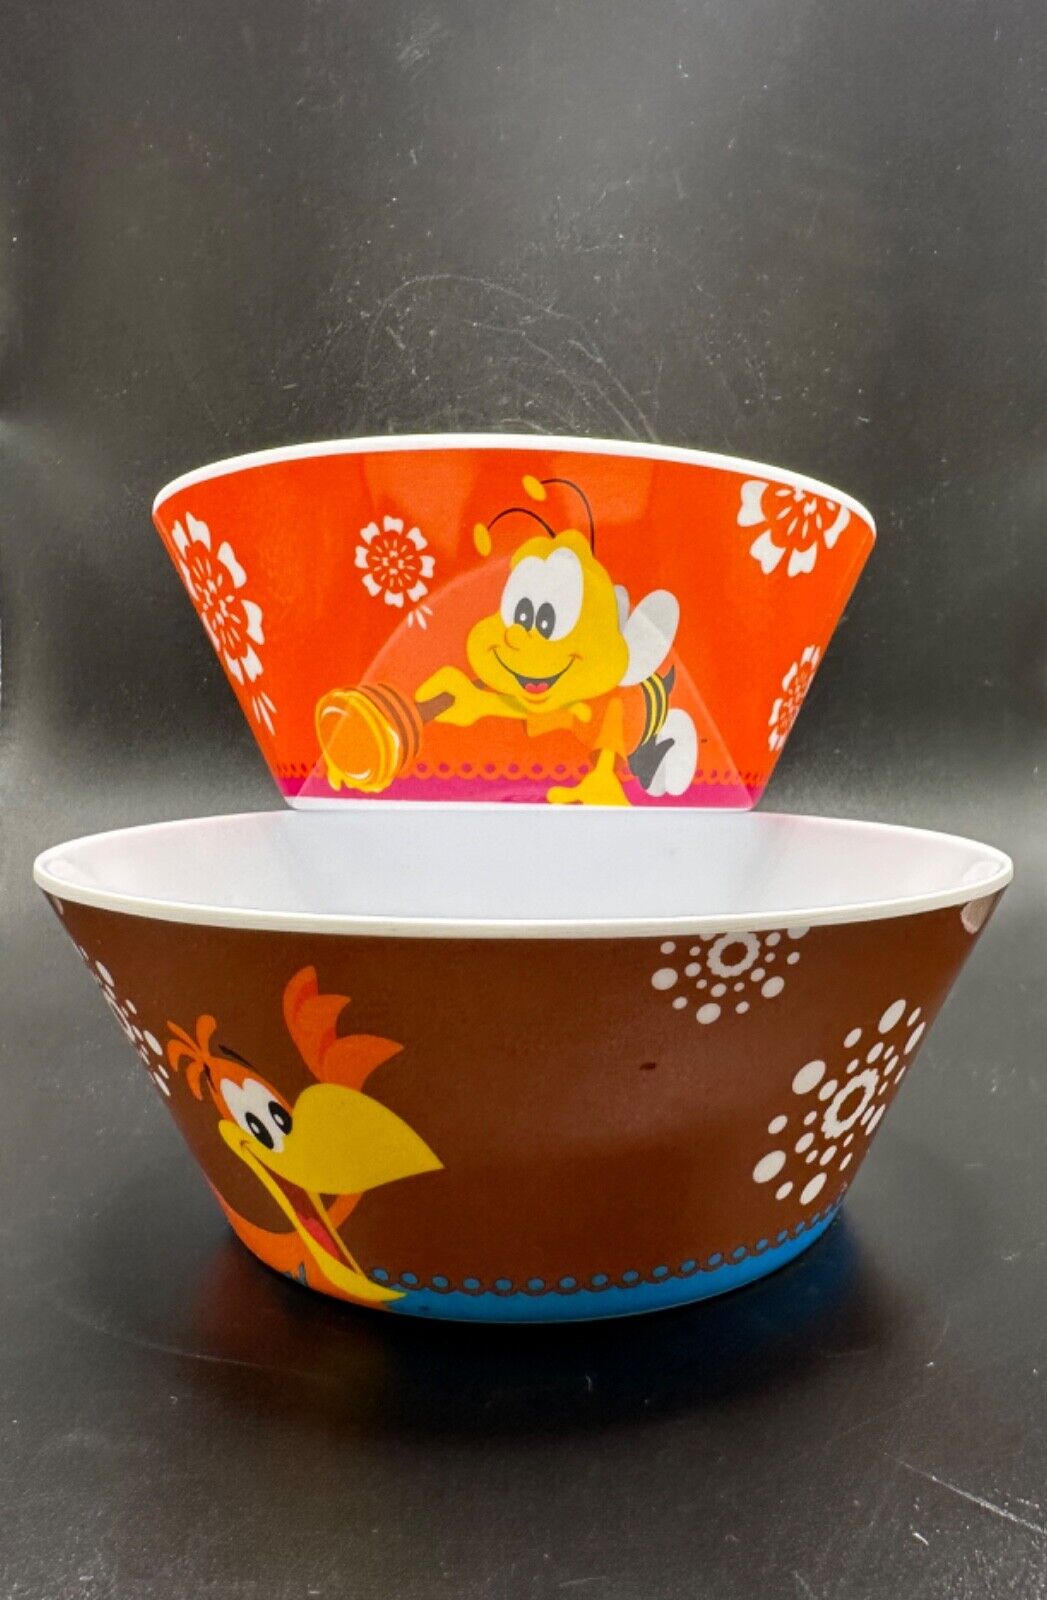 Honey Nut Cherrios & Cocoa Puffs Cereal Bowls Written in Spanish General Mills